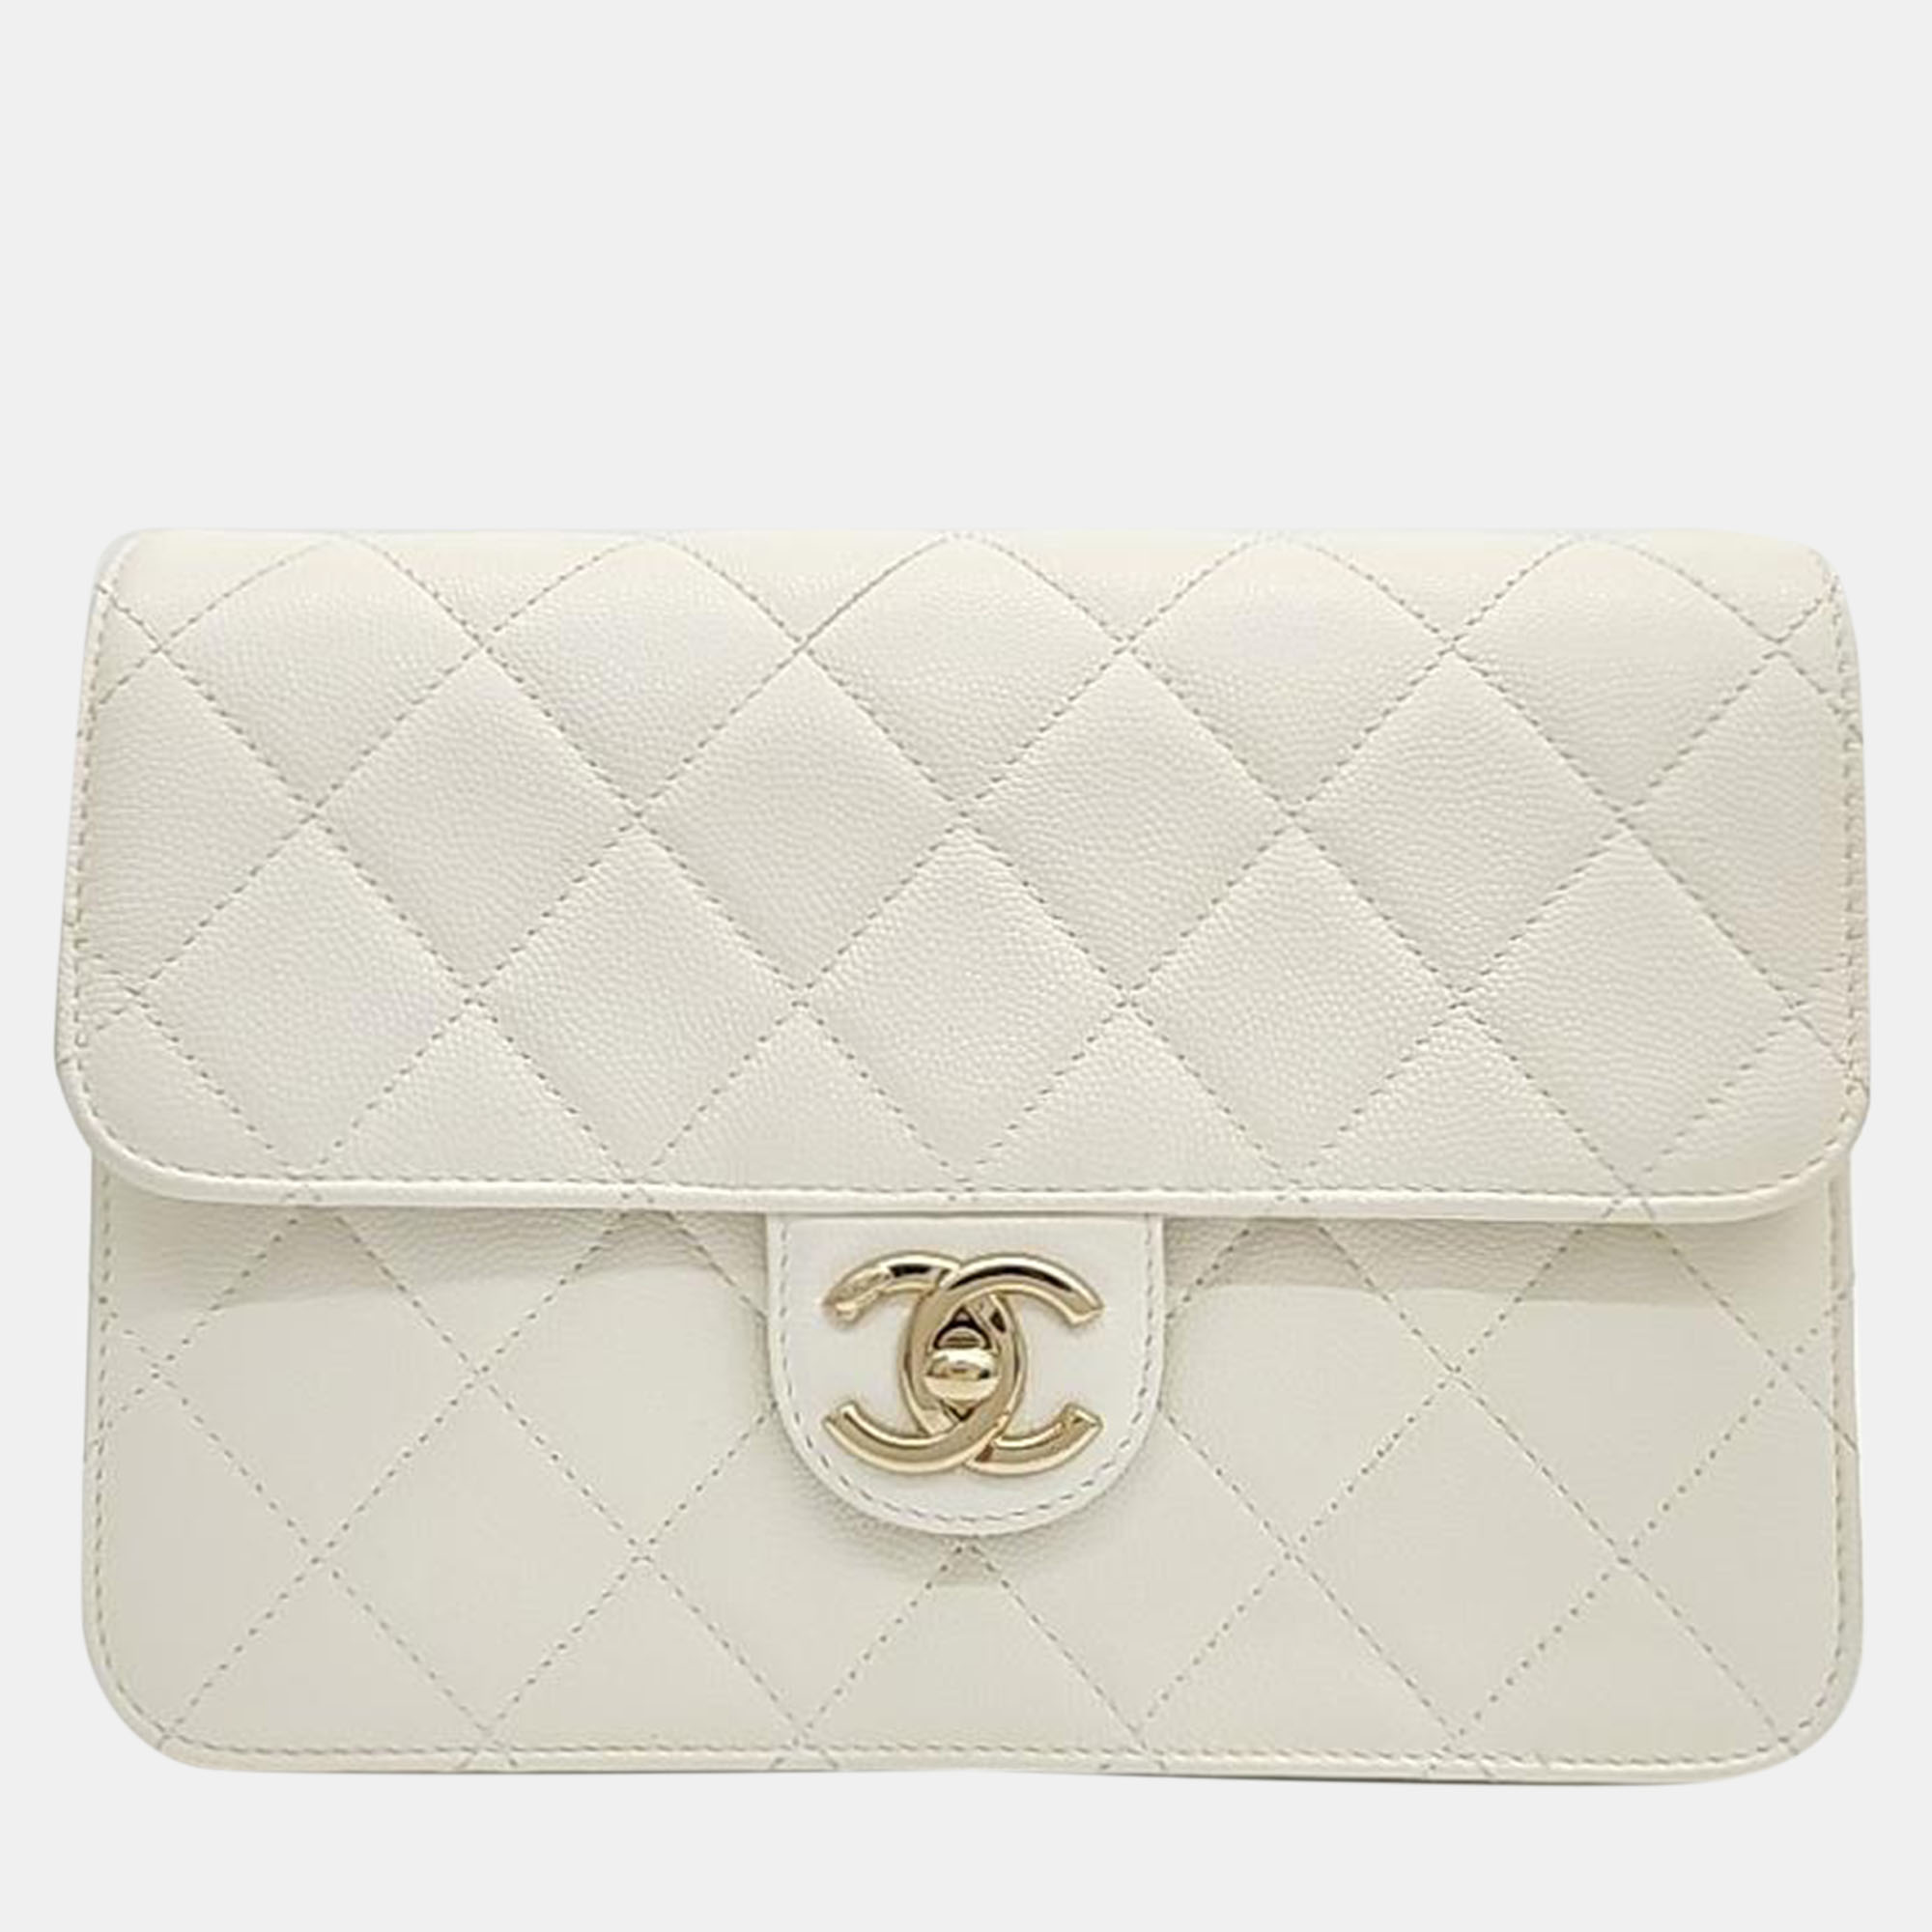 Chanel white caviar leather flap chain shoulder bag